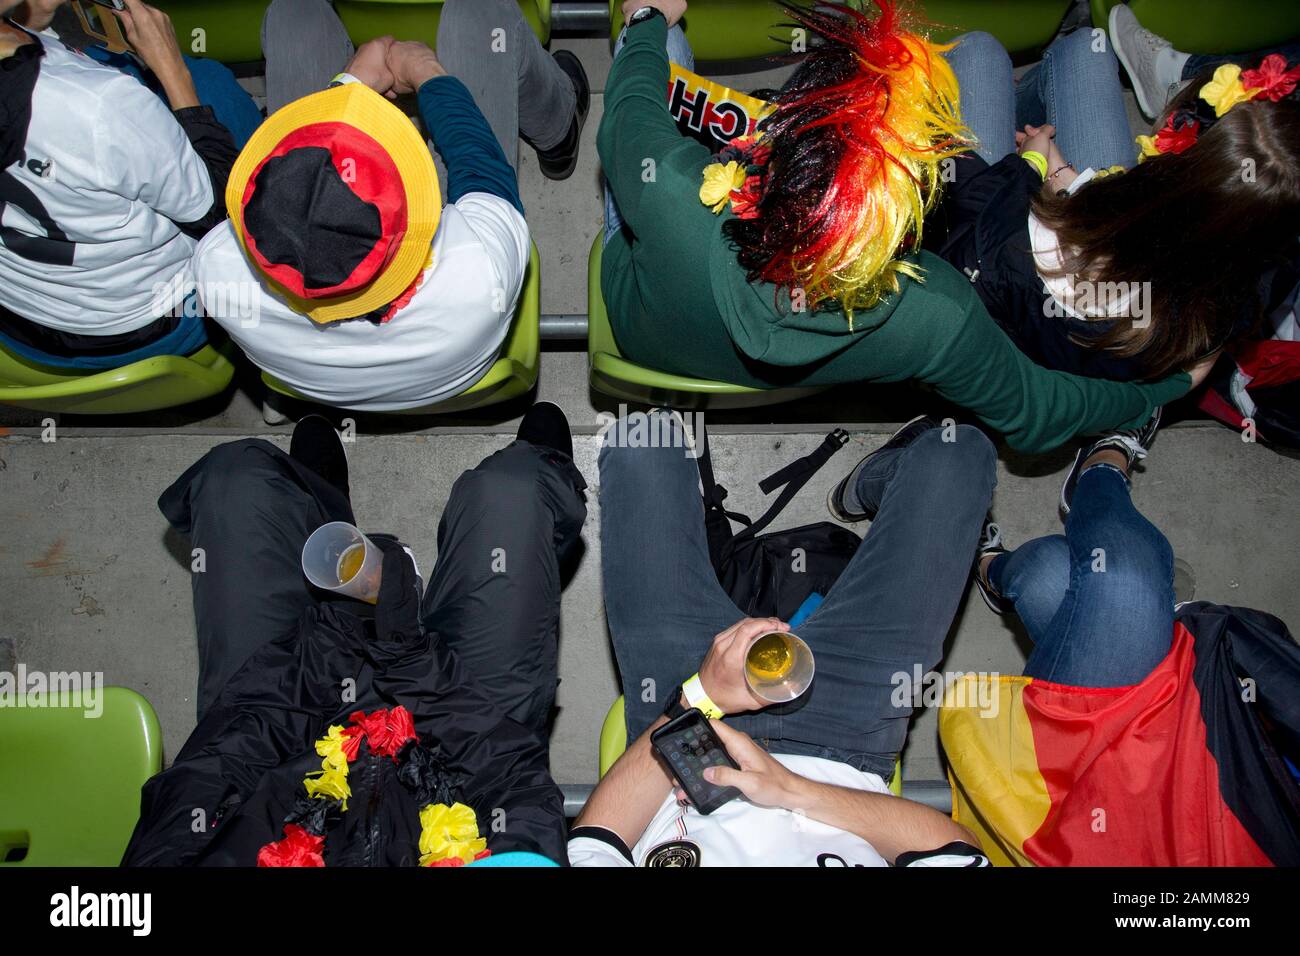 Football fans at the Public Viewing in the Olympic Stadium on the occasion of the quarter final match between Germany and Italy during the European Football Championship 2016. [automated translation] Stock Photo